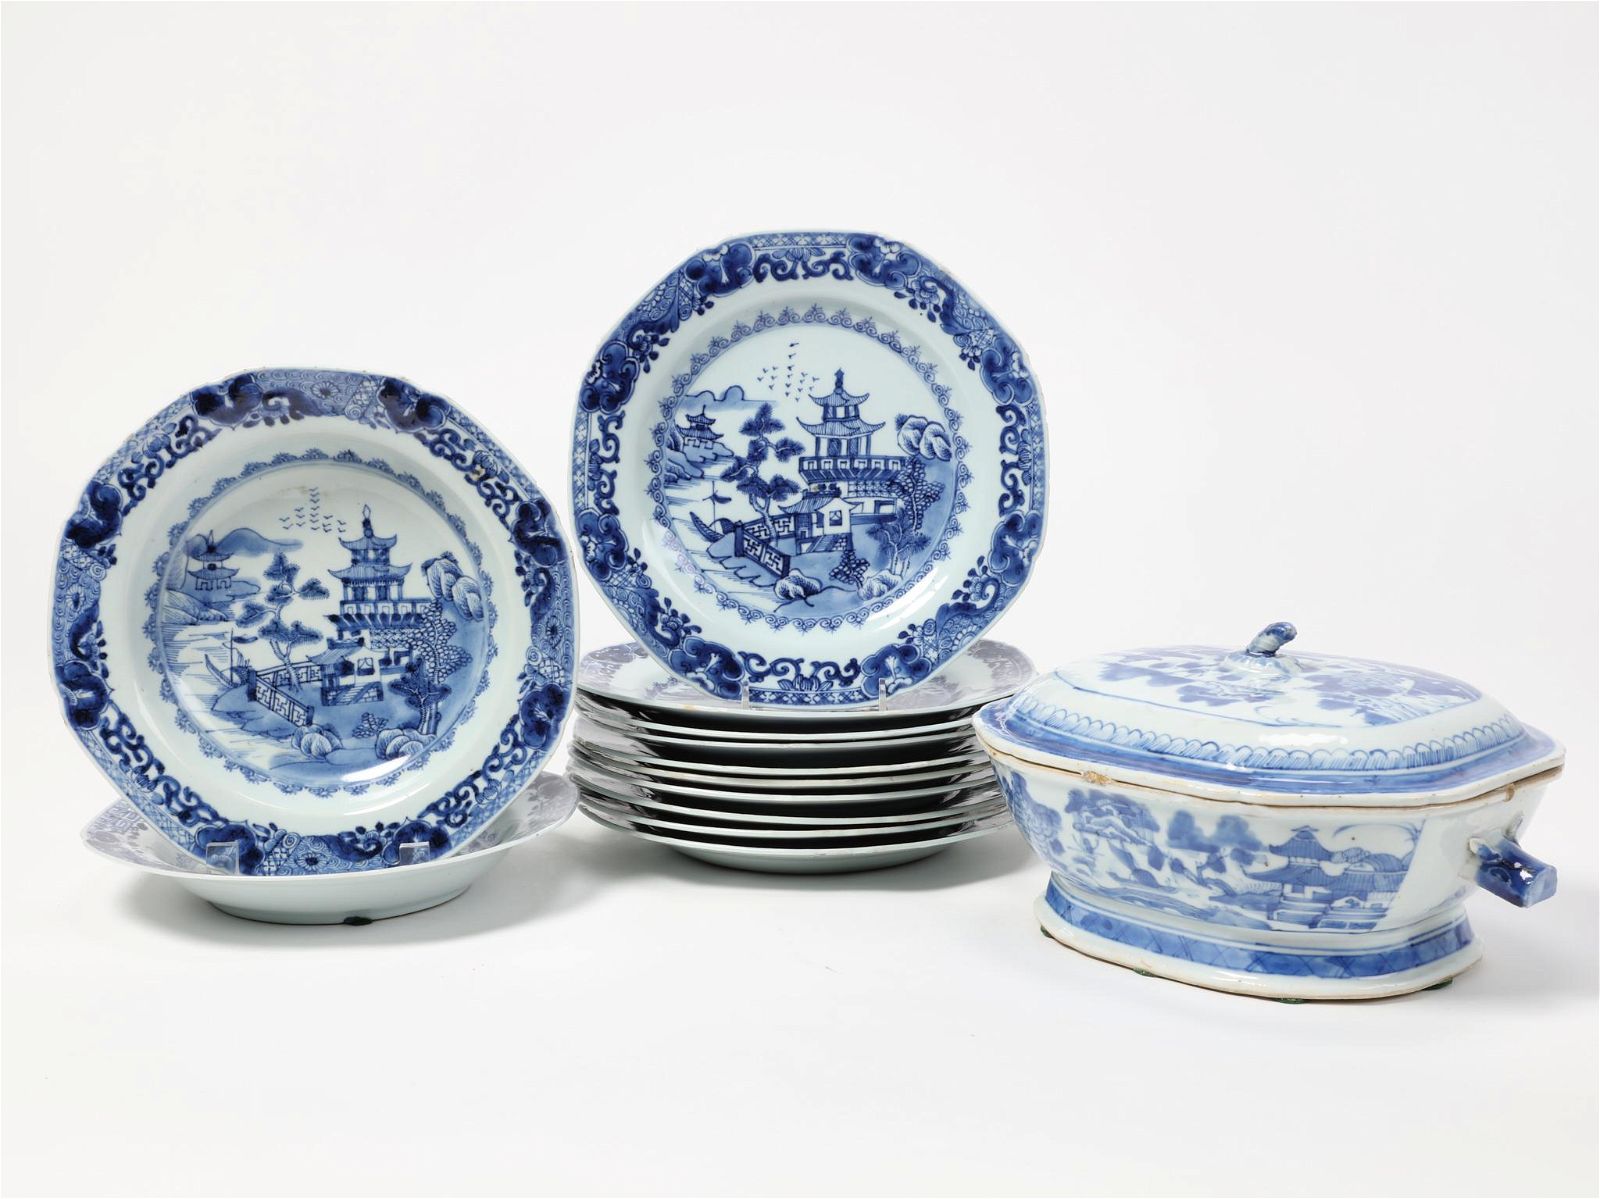 13 CHINESE EXPORT BLUE AND WHITE